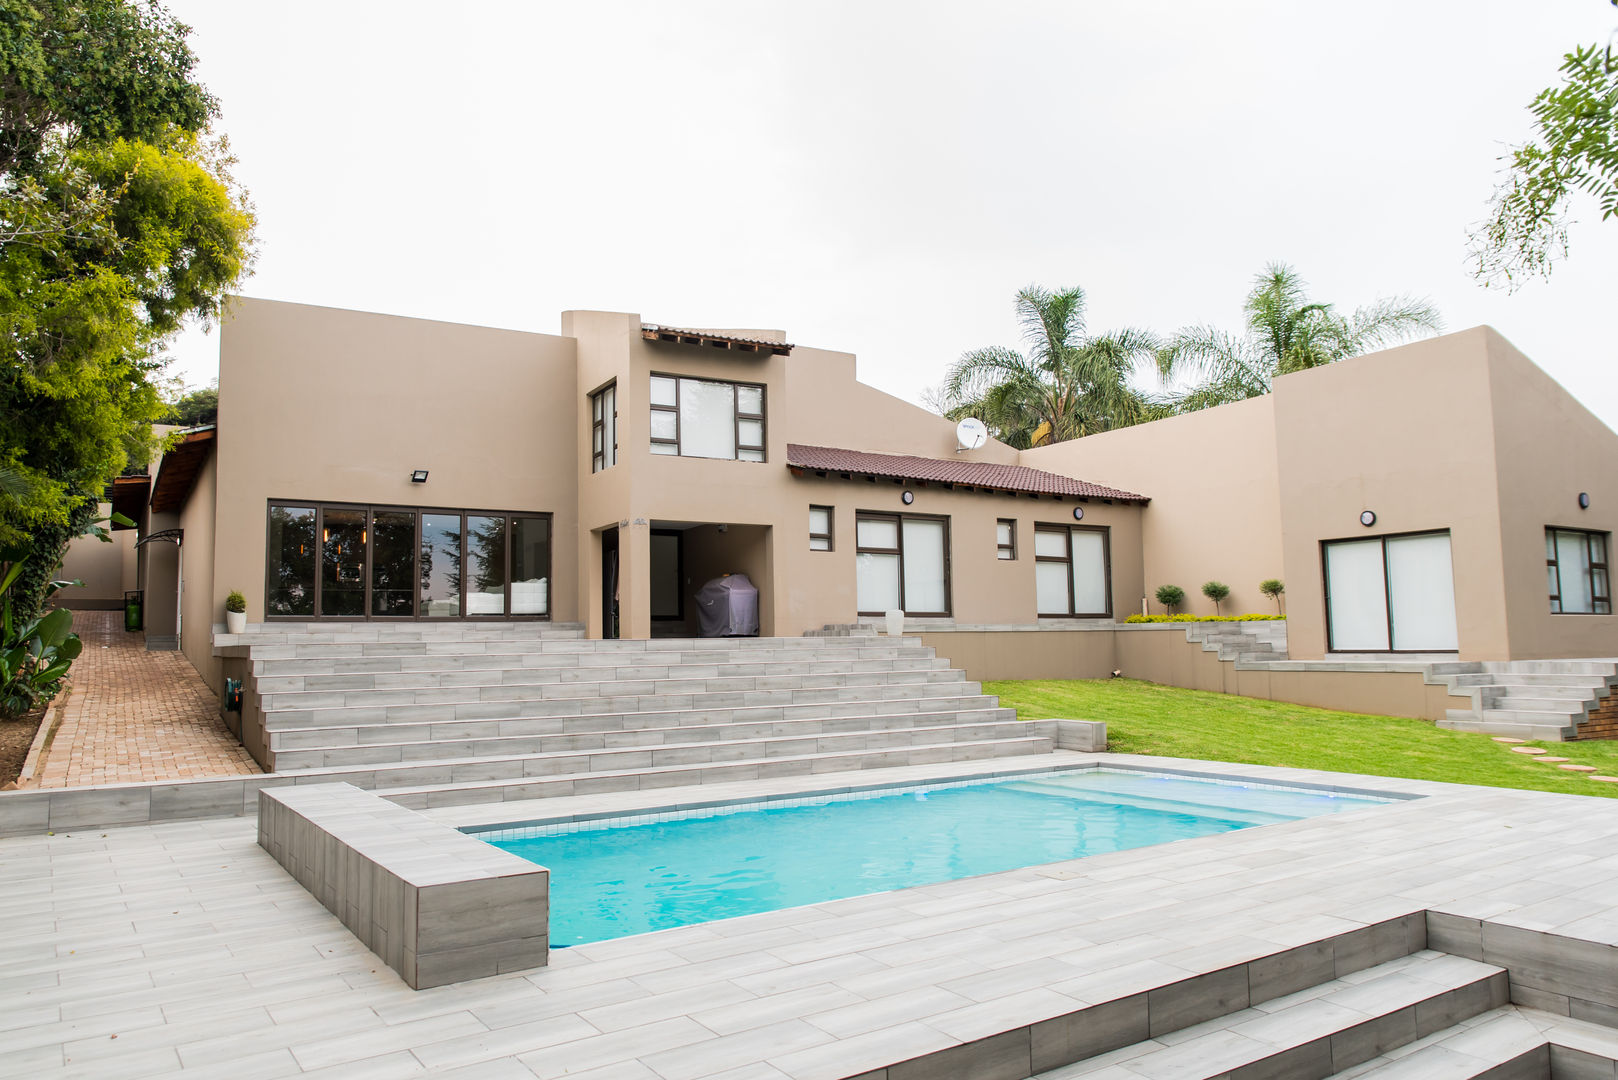 The Gamito residence in Weltervreden Park , TOP CENTRE PROPERTIES GROUP (PTY) LTD TOP CENTRE PROPERTIES GROUP (PTY) LTD Casas estilo moderno: ideas, arquitectura e imágenes